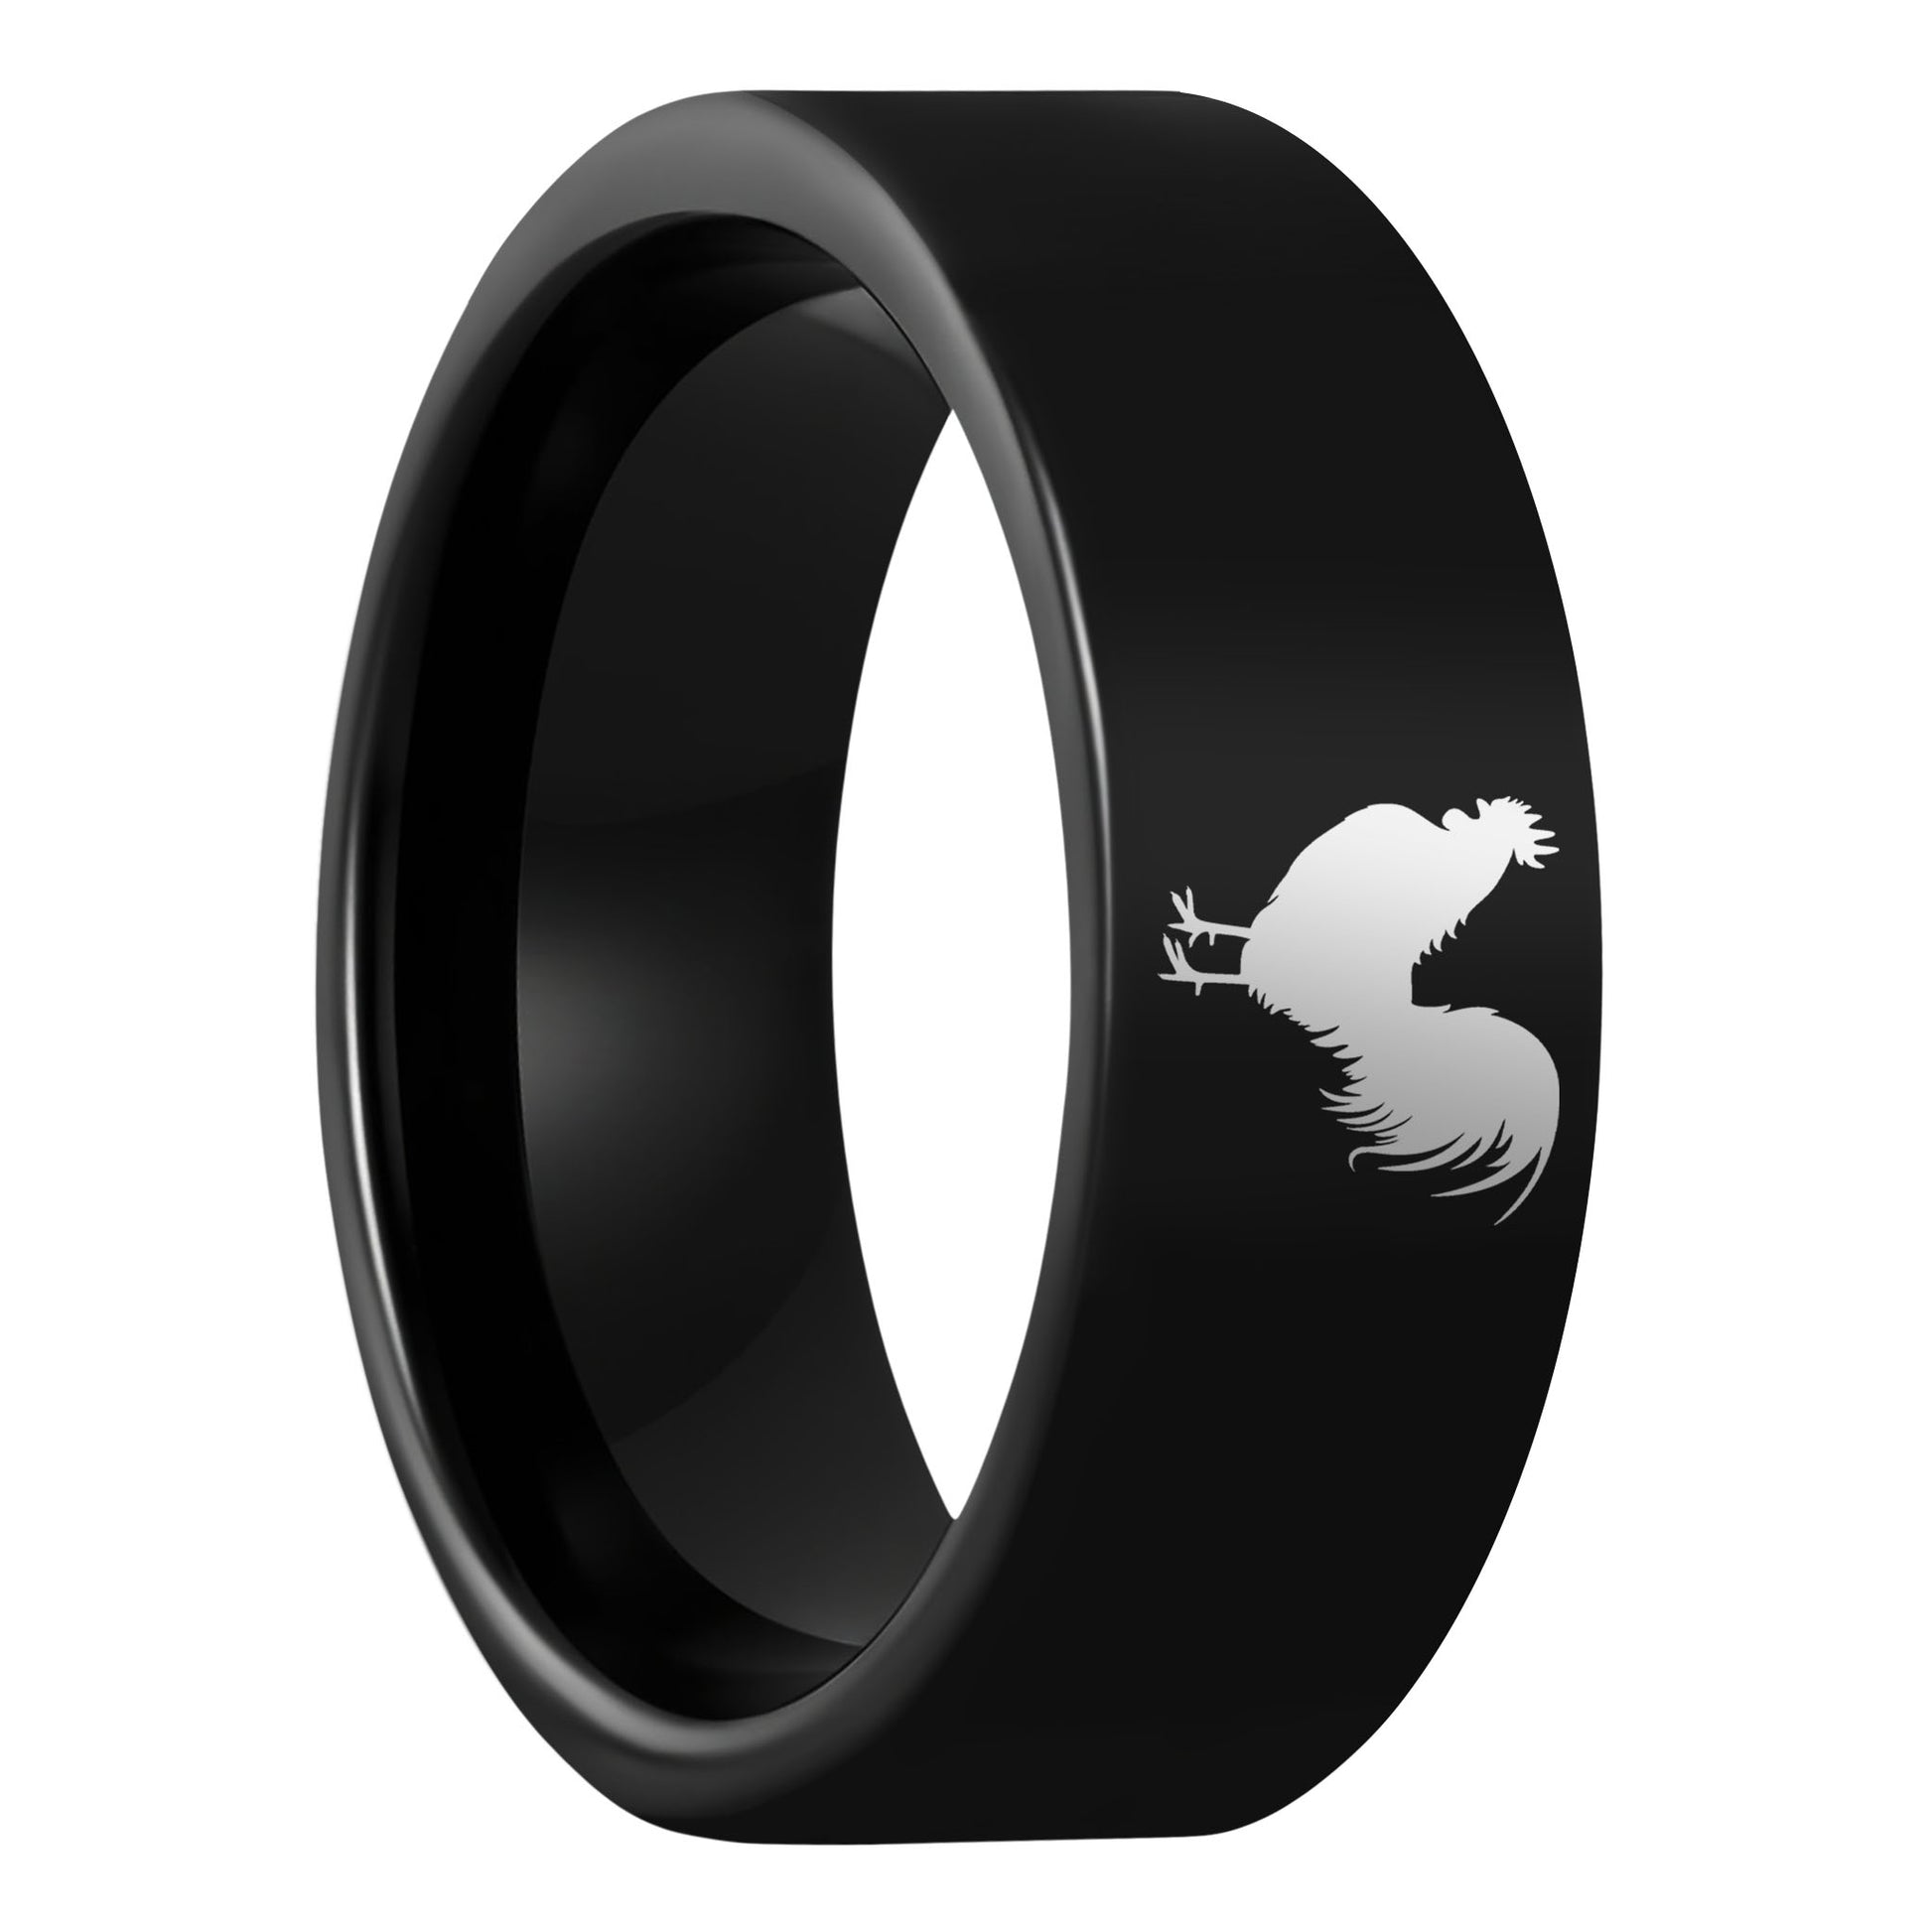 One Rooster Black Tungsten Men's Wedding Band displayed on a plain white background